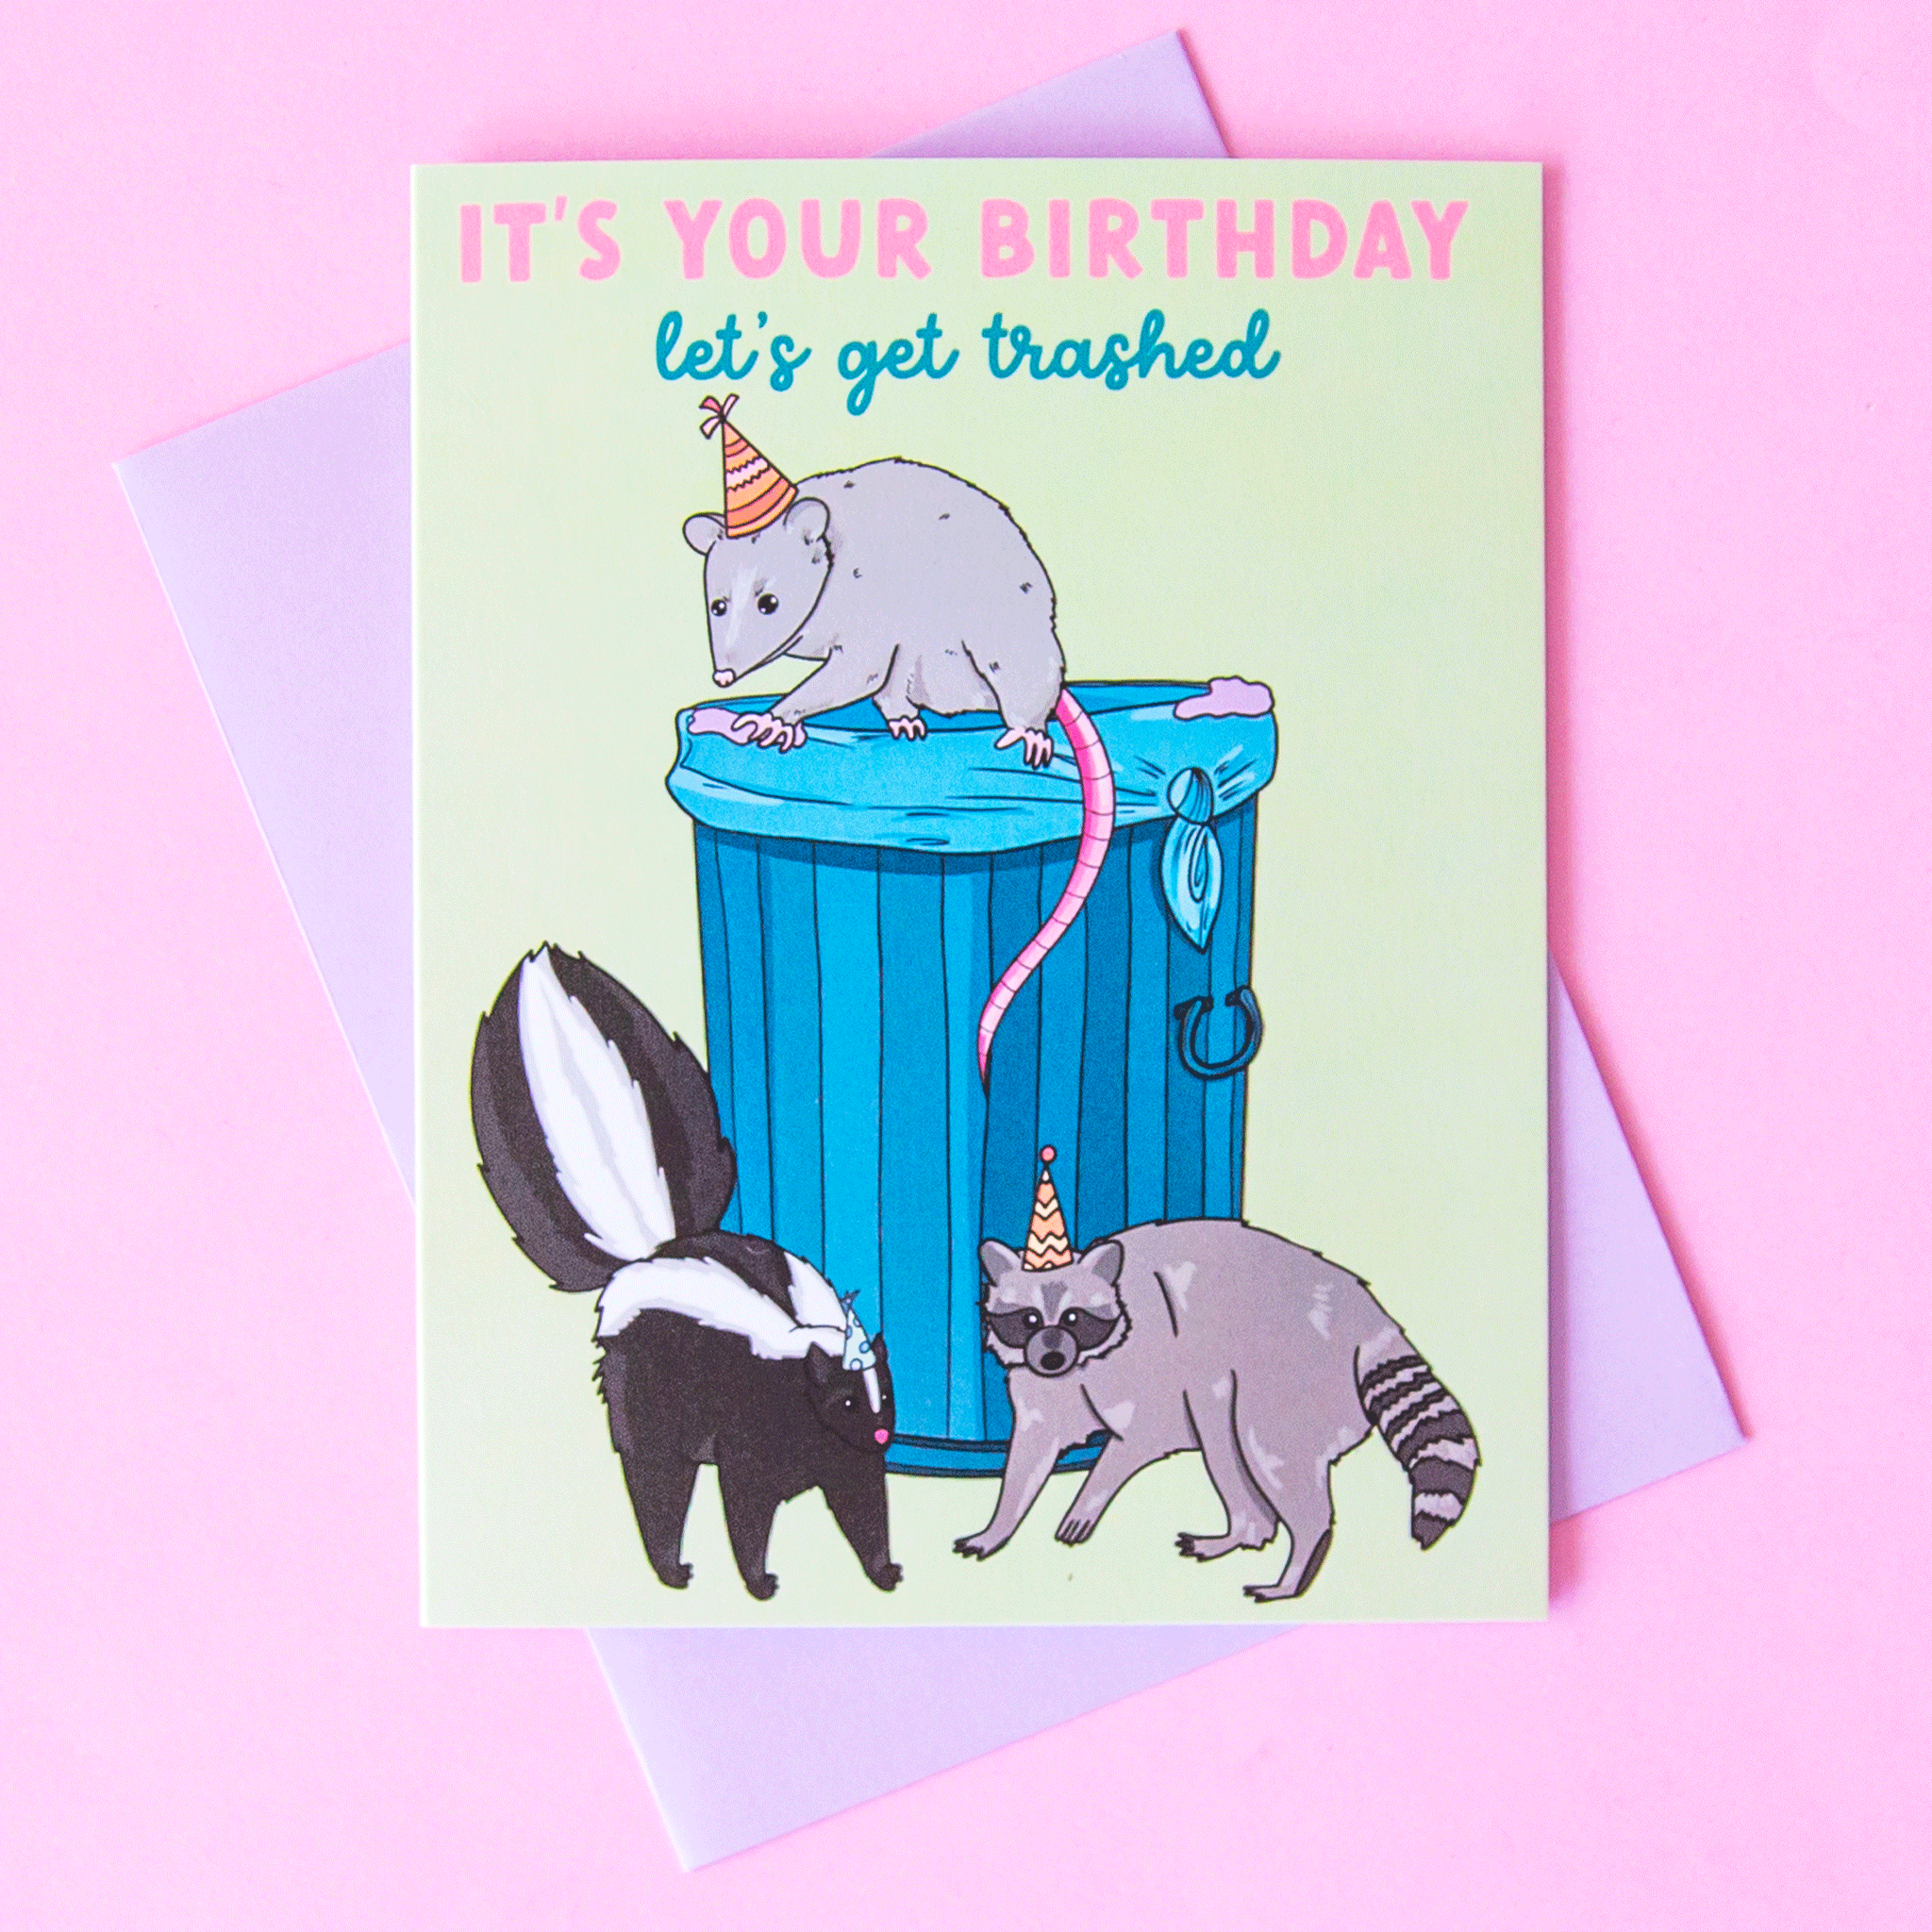 This card reads, &quot;It&#39;s Your Birthday Let&#39;s Get Trashed&quot; accompanied by an illustration of a possum, skunk and raccoon wearing birthday hats surrounding a trash can.